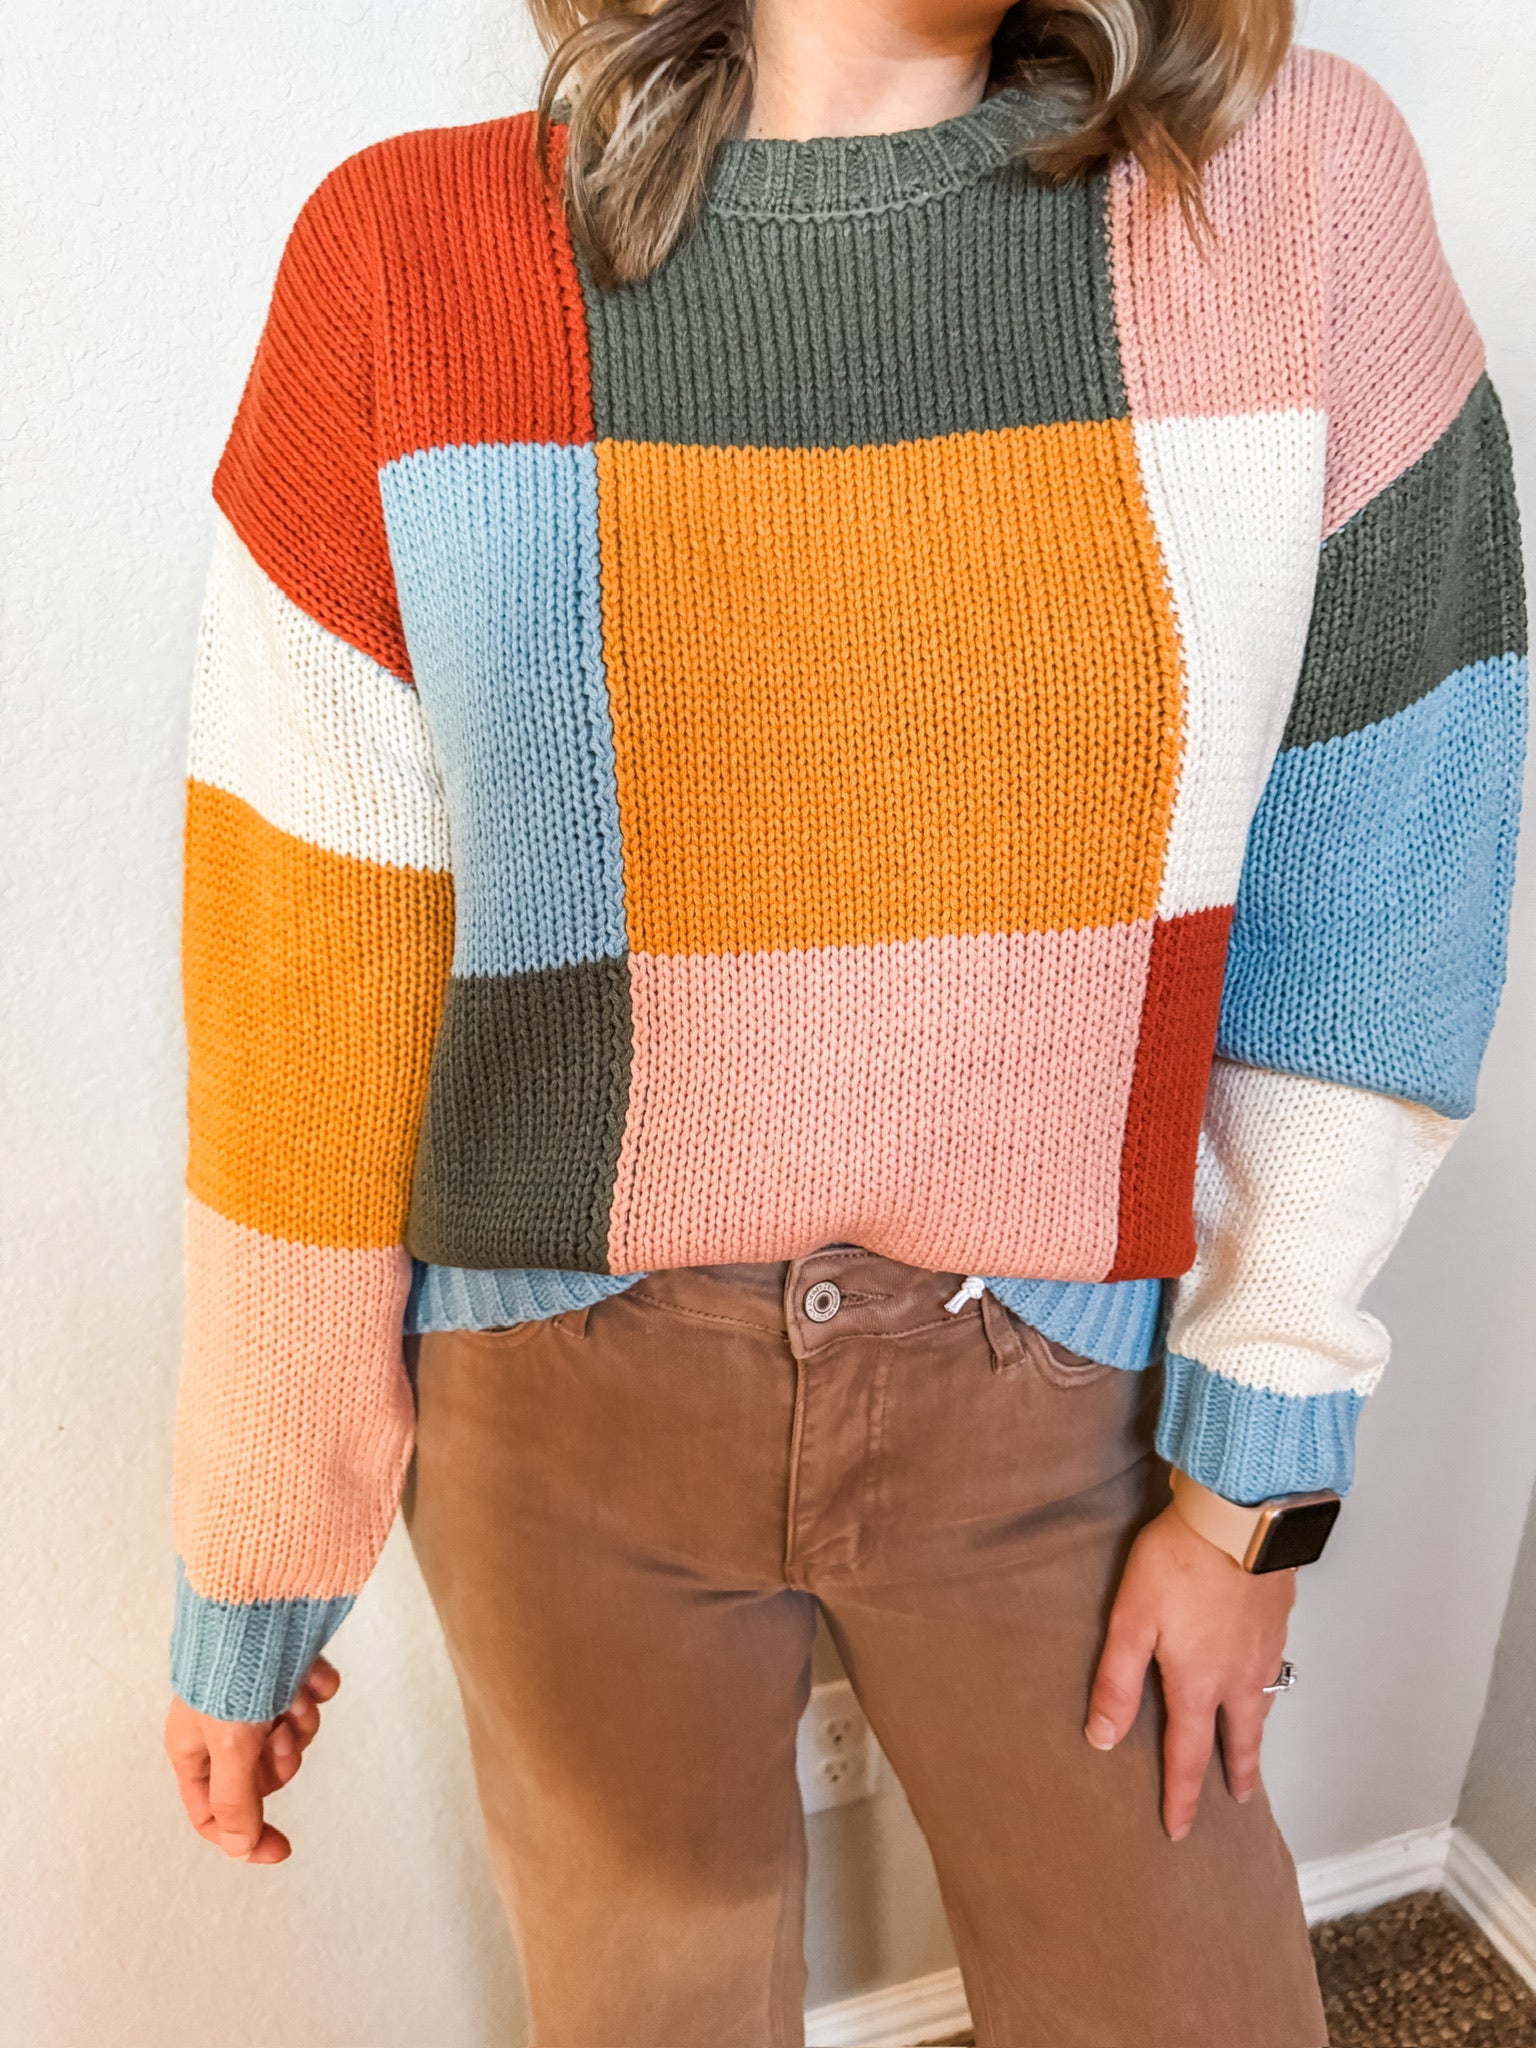 Colder Days Ahead Color Block Sweater